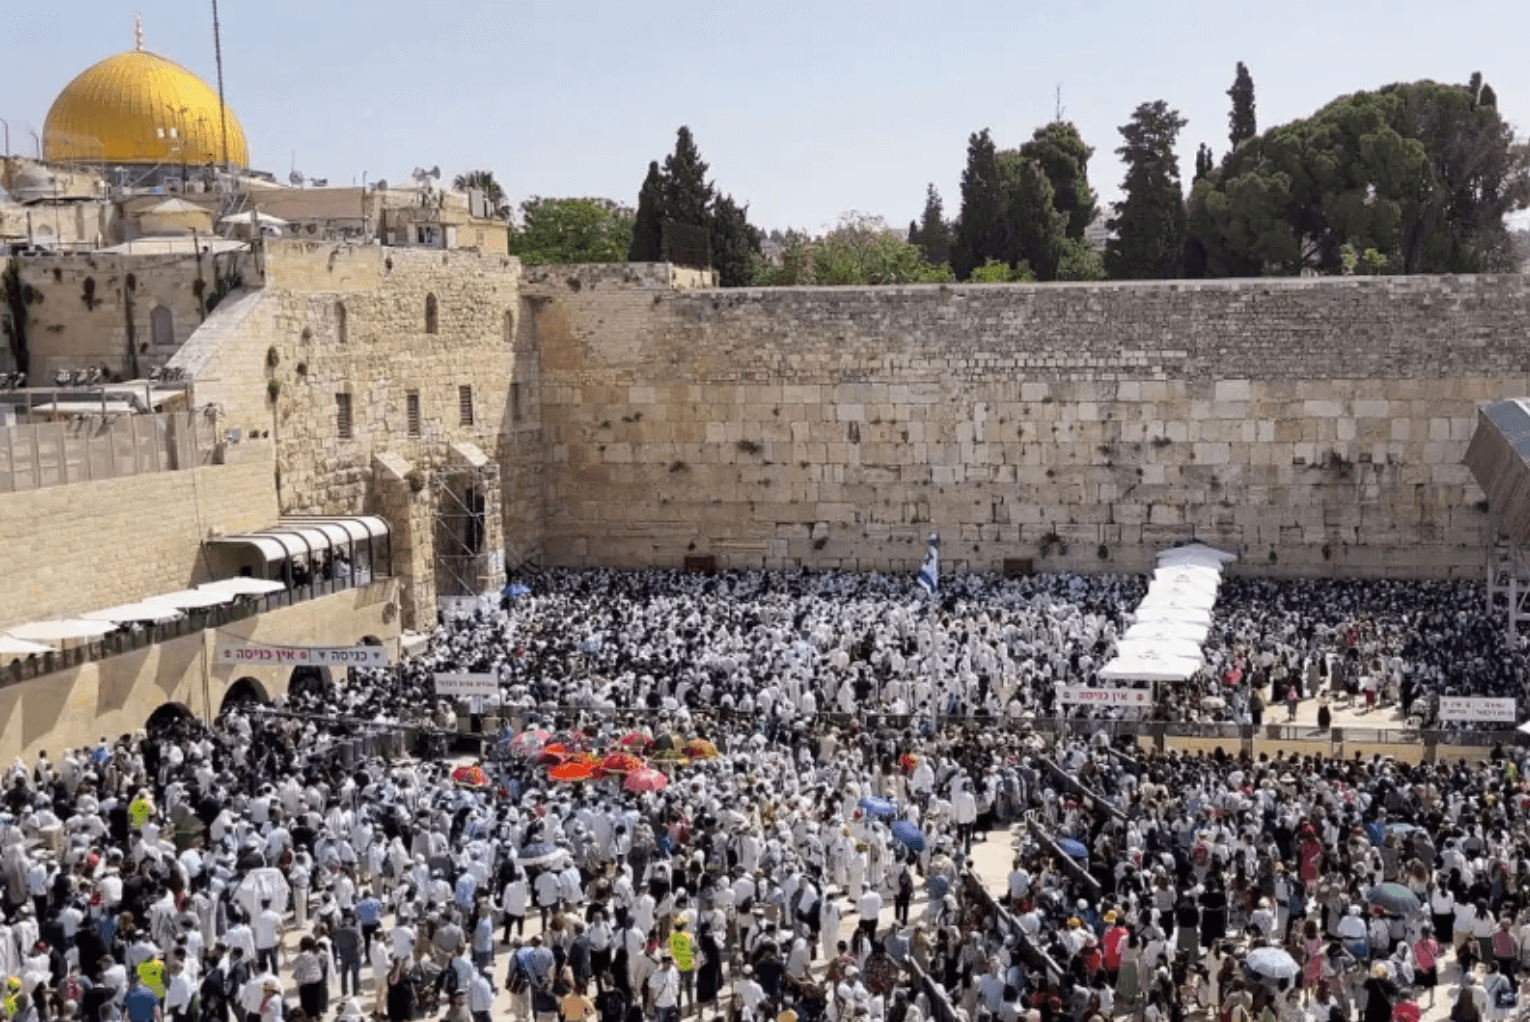 Thousands Attend Jerusalem Annual Passover Priestly Blessing, Focus on Hostages